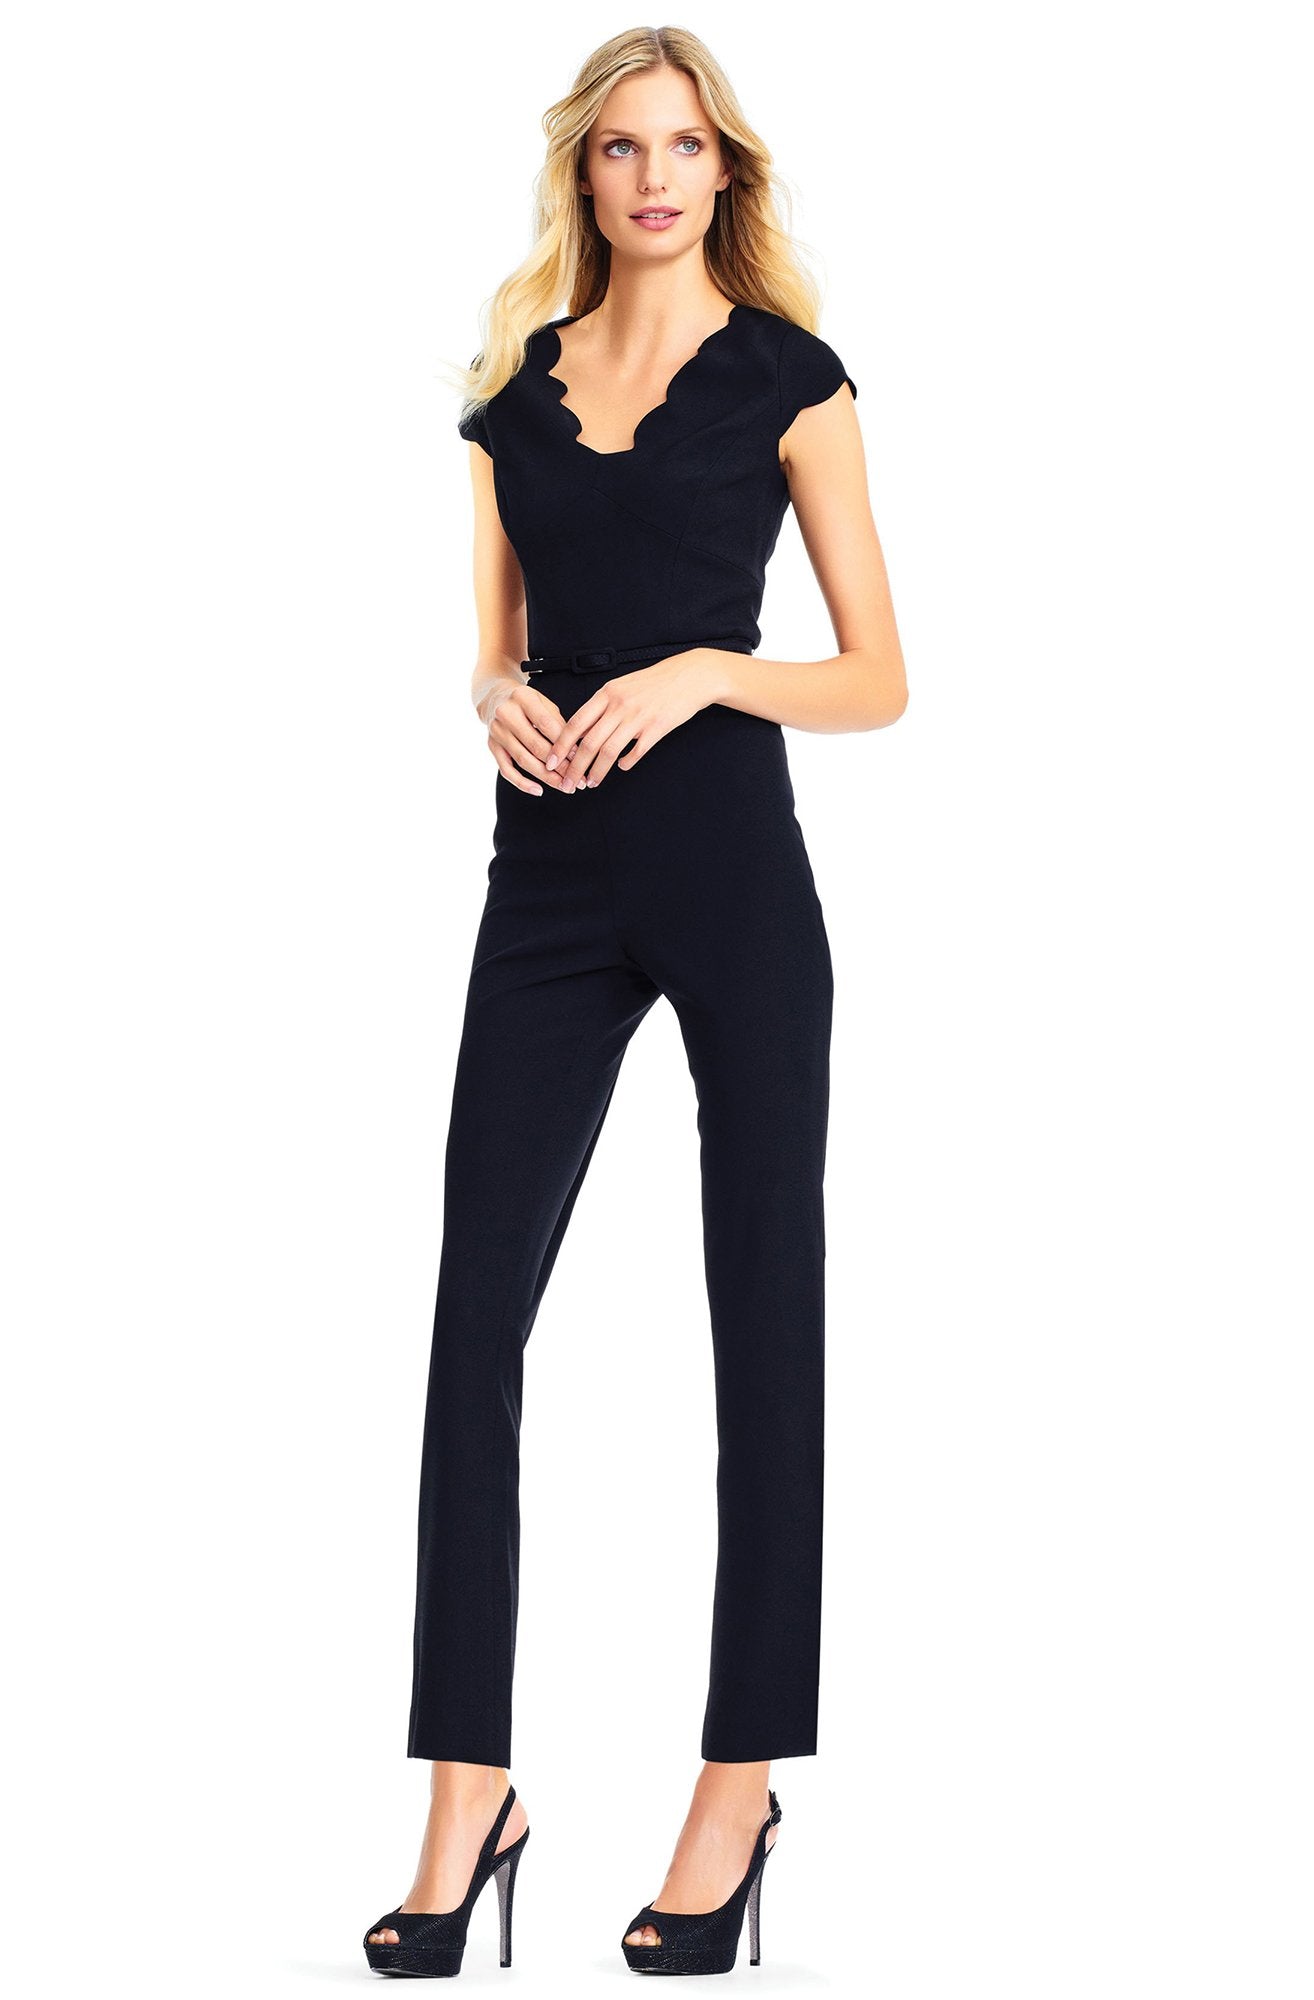 Adrianna Papell - AP1D101745 Fitted V-Neck Cap Sleeves Jumpsuit In Black